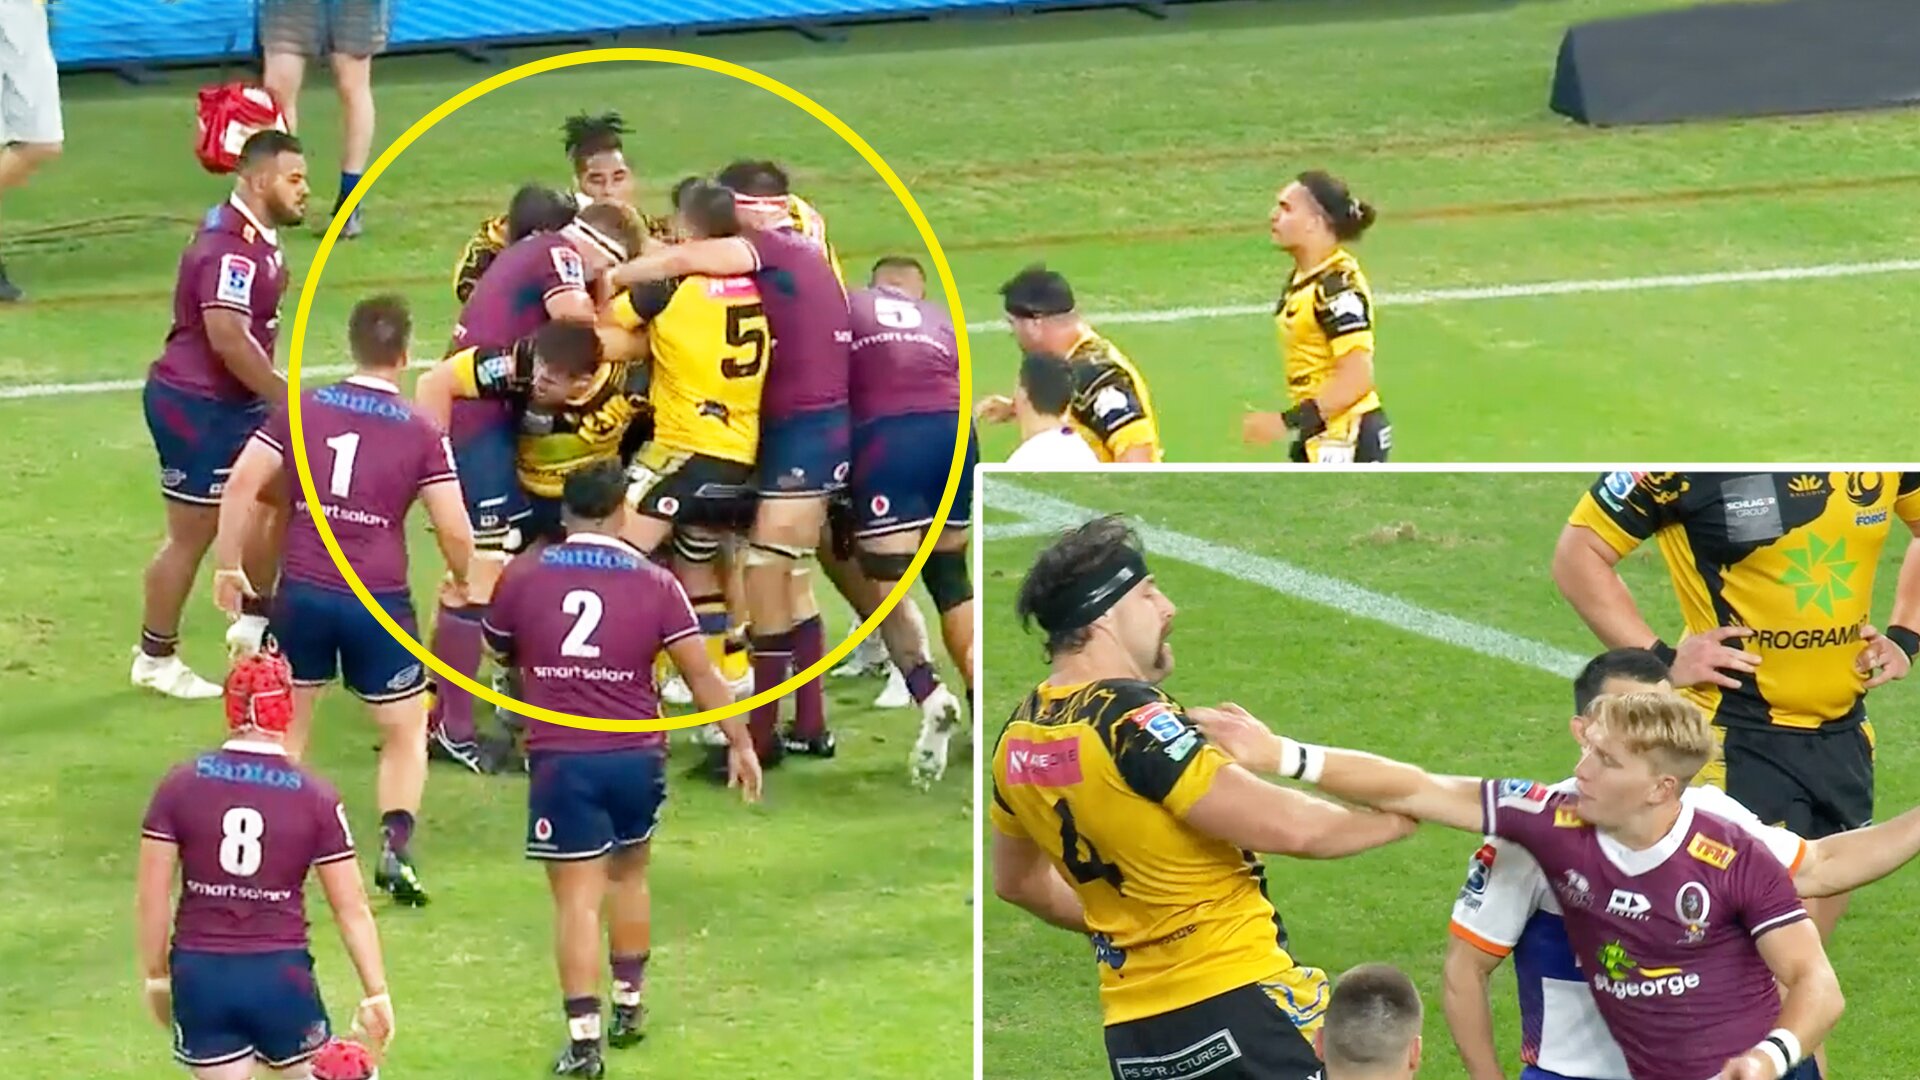 Shocking scenes as mass brawl breaks out in high scoring Super Rugby thriller